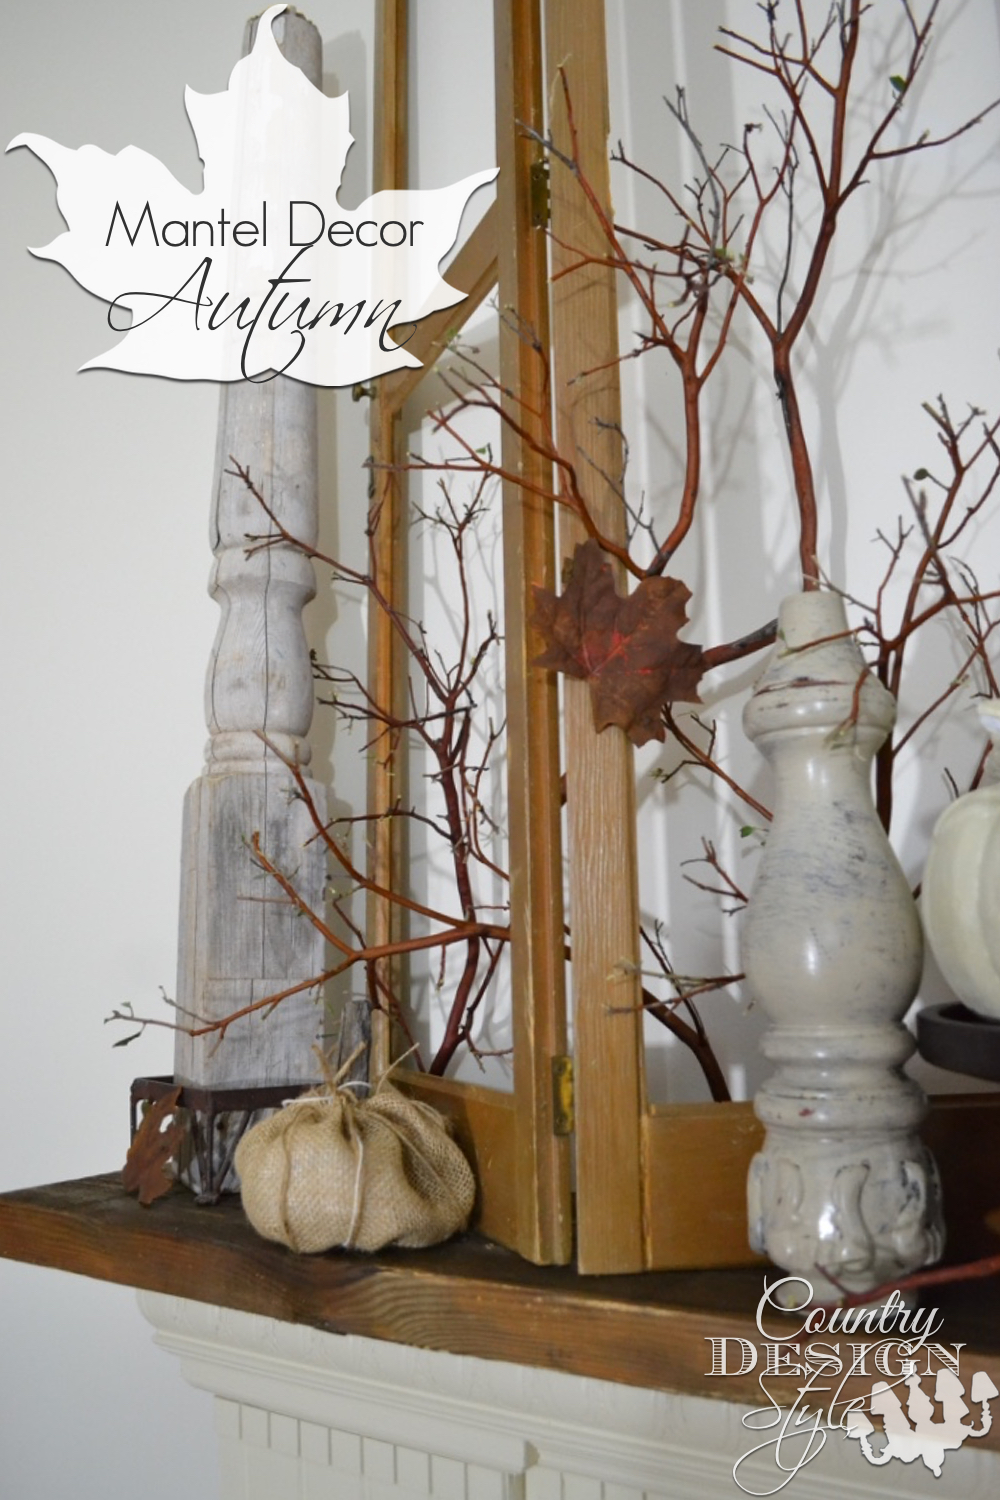 Mantel decor for autumn with burlap old shutters vintage spindles and painted pumpkins www.countrydesignstyle.com